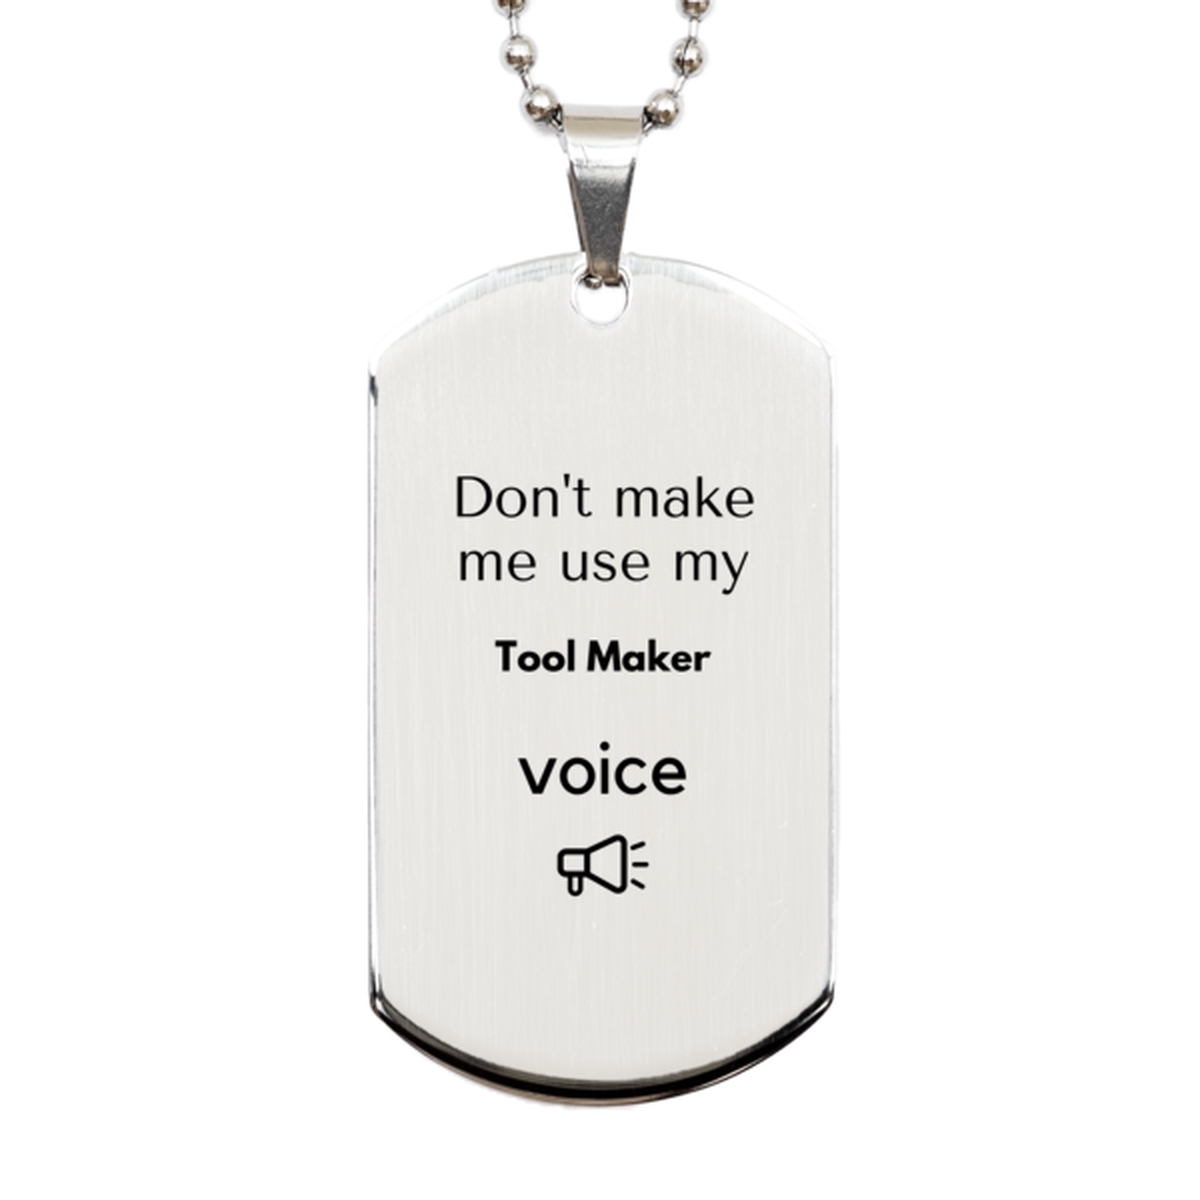 Don't make me use my Tool Maker voice, Sarcasm Tool Maker Gifts, Christmas Tool Maker Silver Dog Tag Birthday Unique Gifts For Tool Maker Coworkers, Men, Women, Colleague, Friends